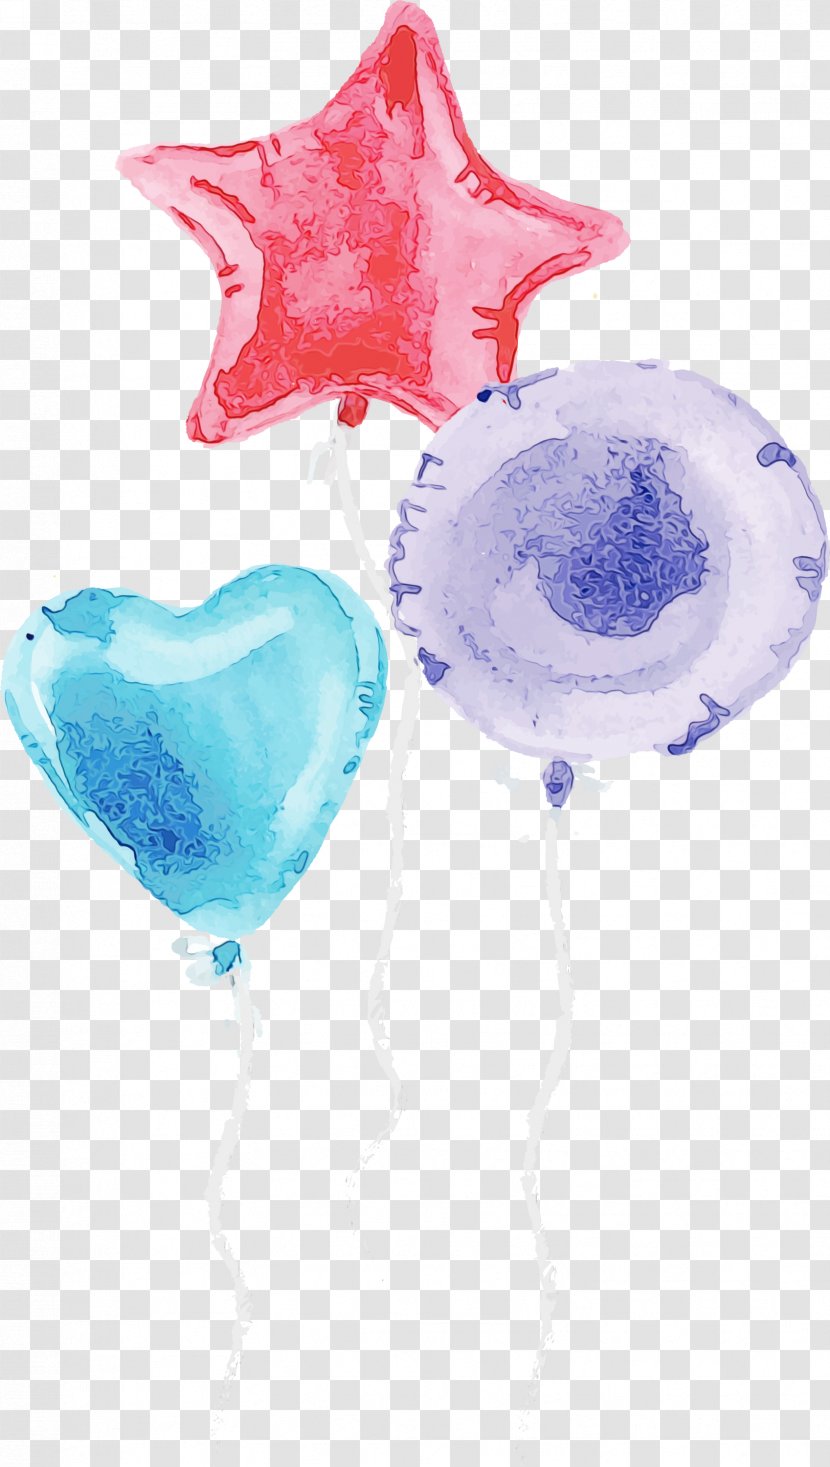 Balloon Heart Party Supply Watercolor Paint Transparent PNG